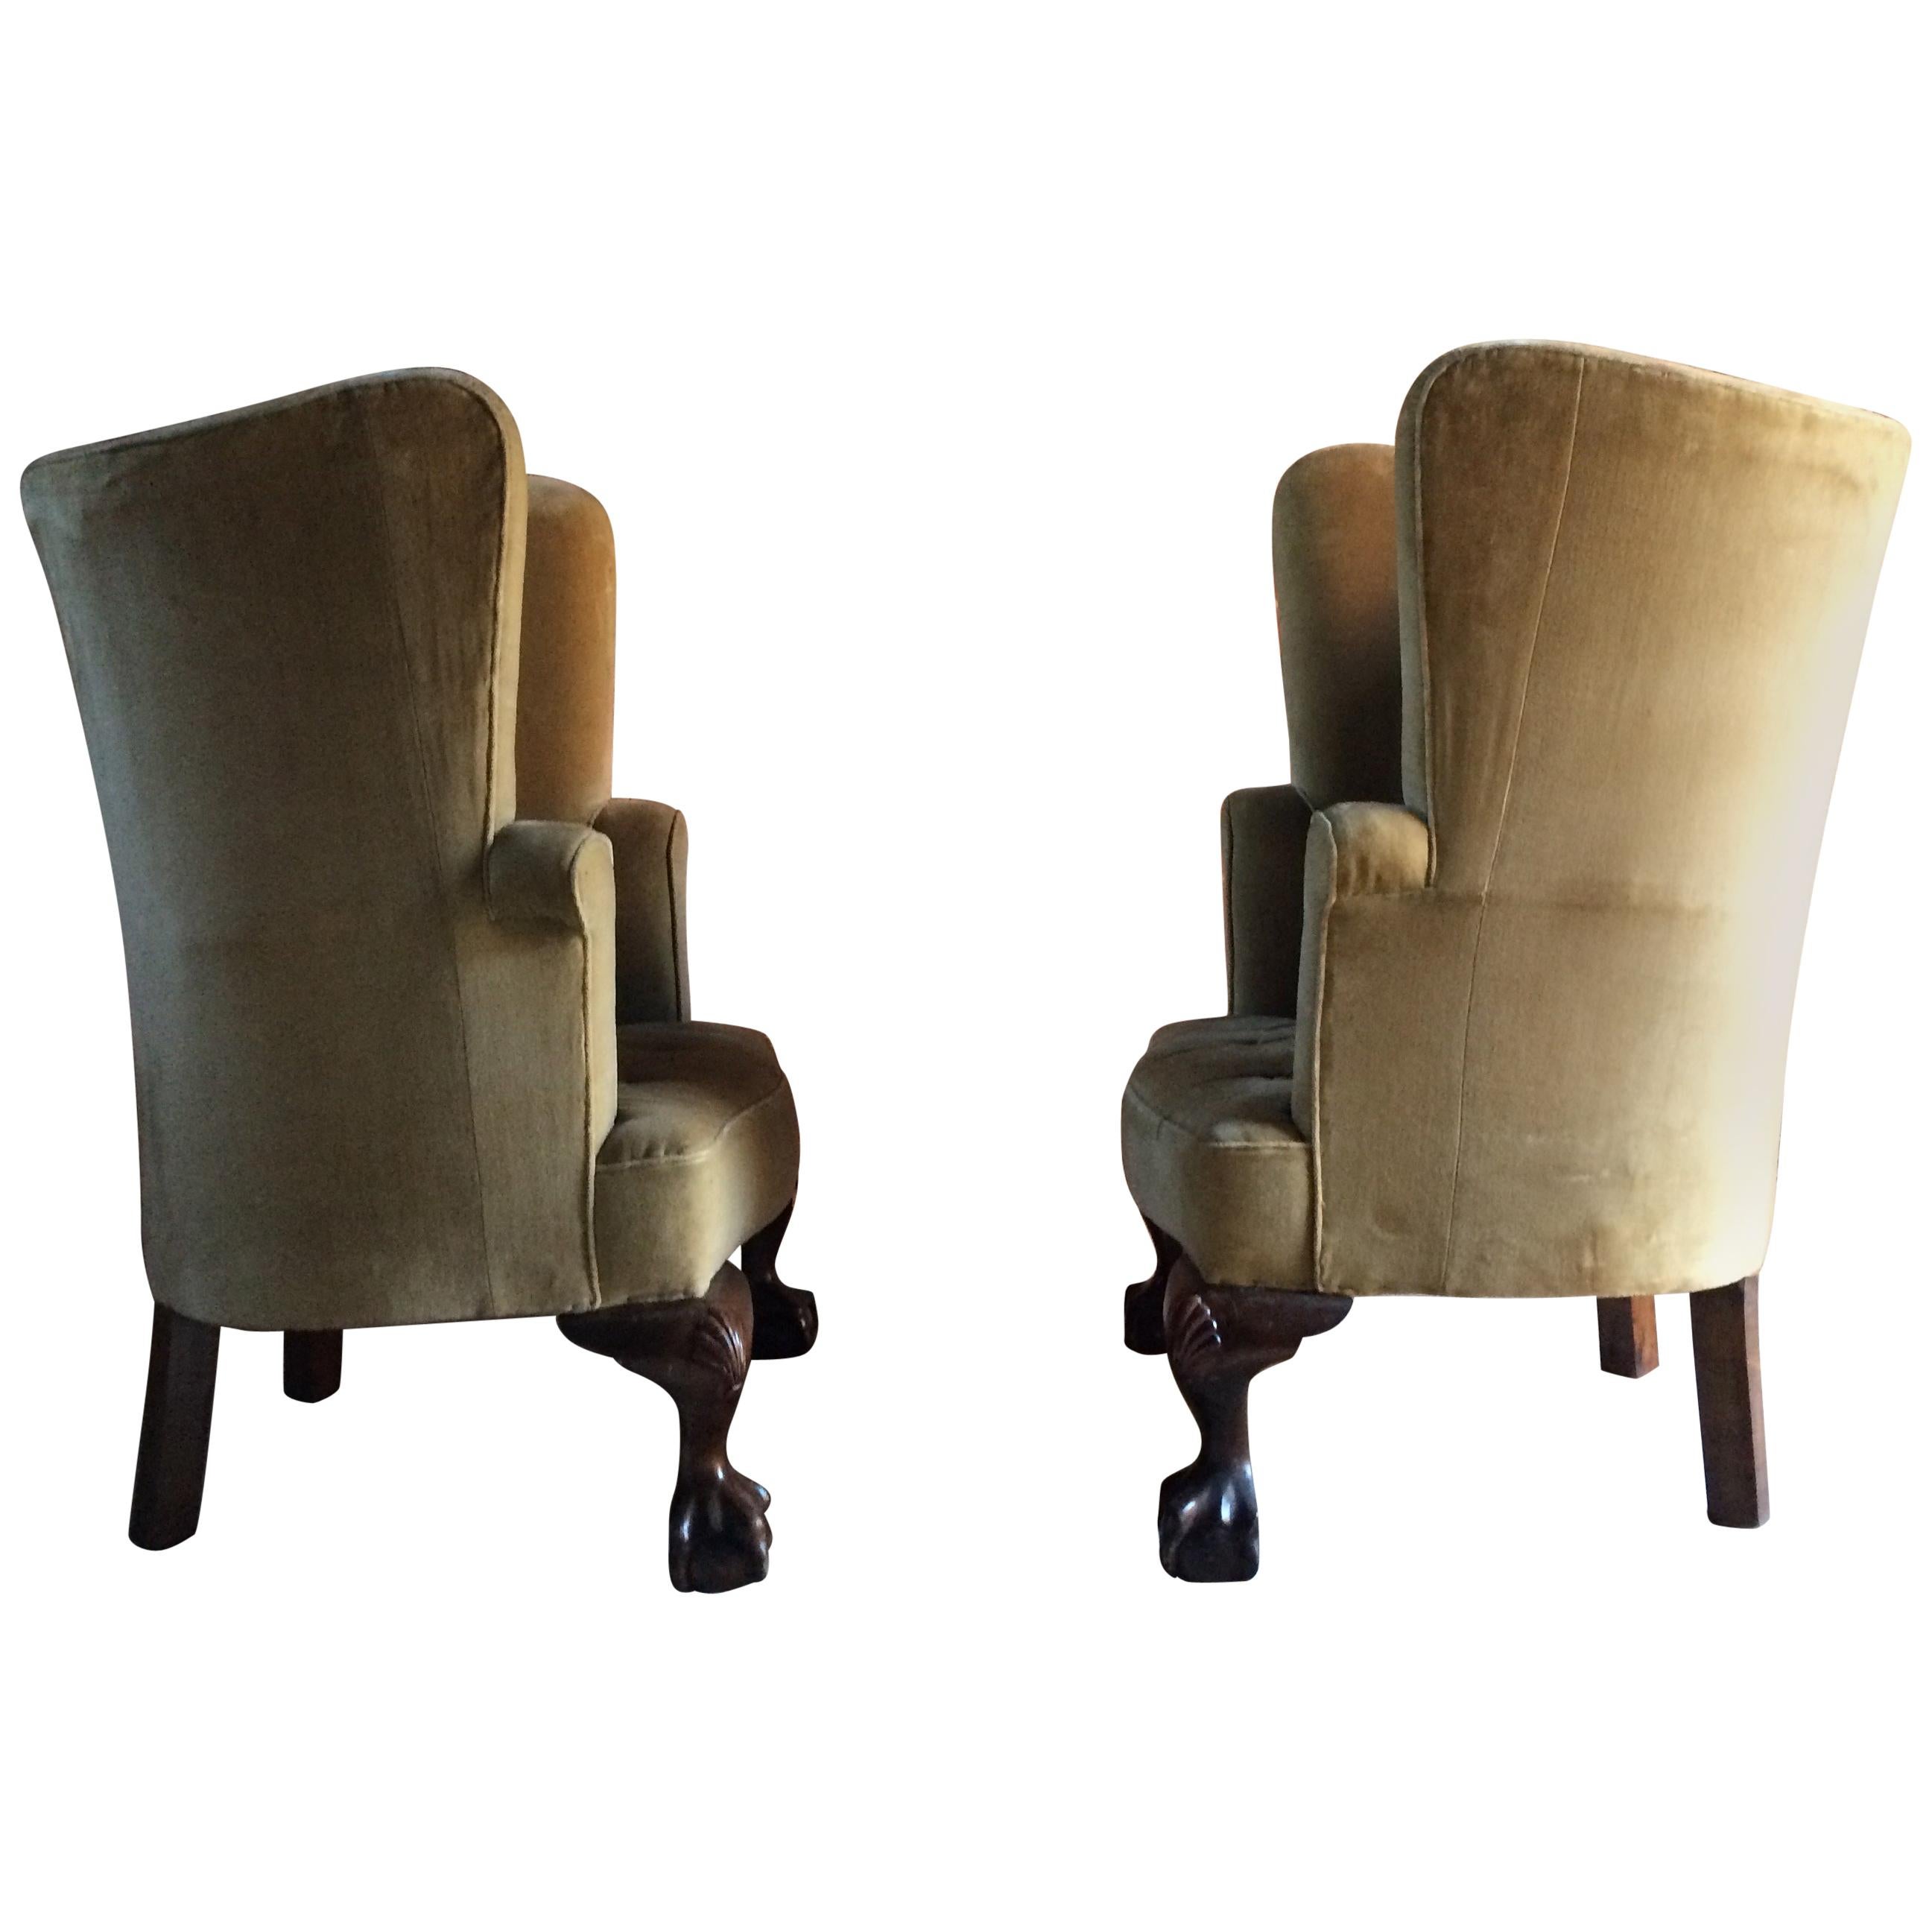 Antique Barrel Back Armchairs Porters Chairs Pair George II Style, circa 1860